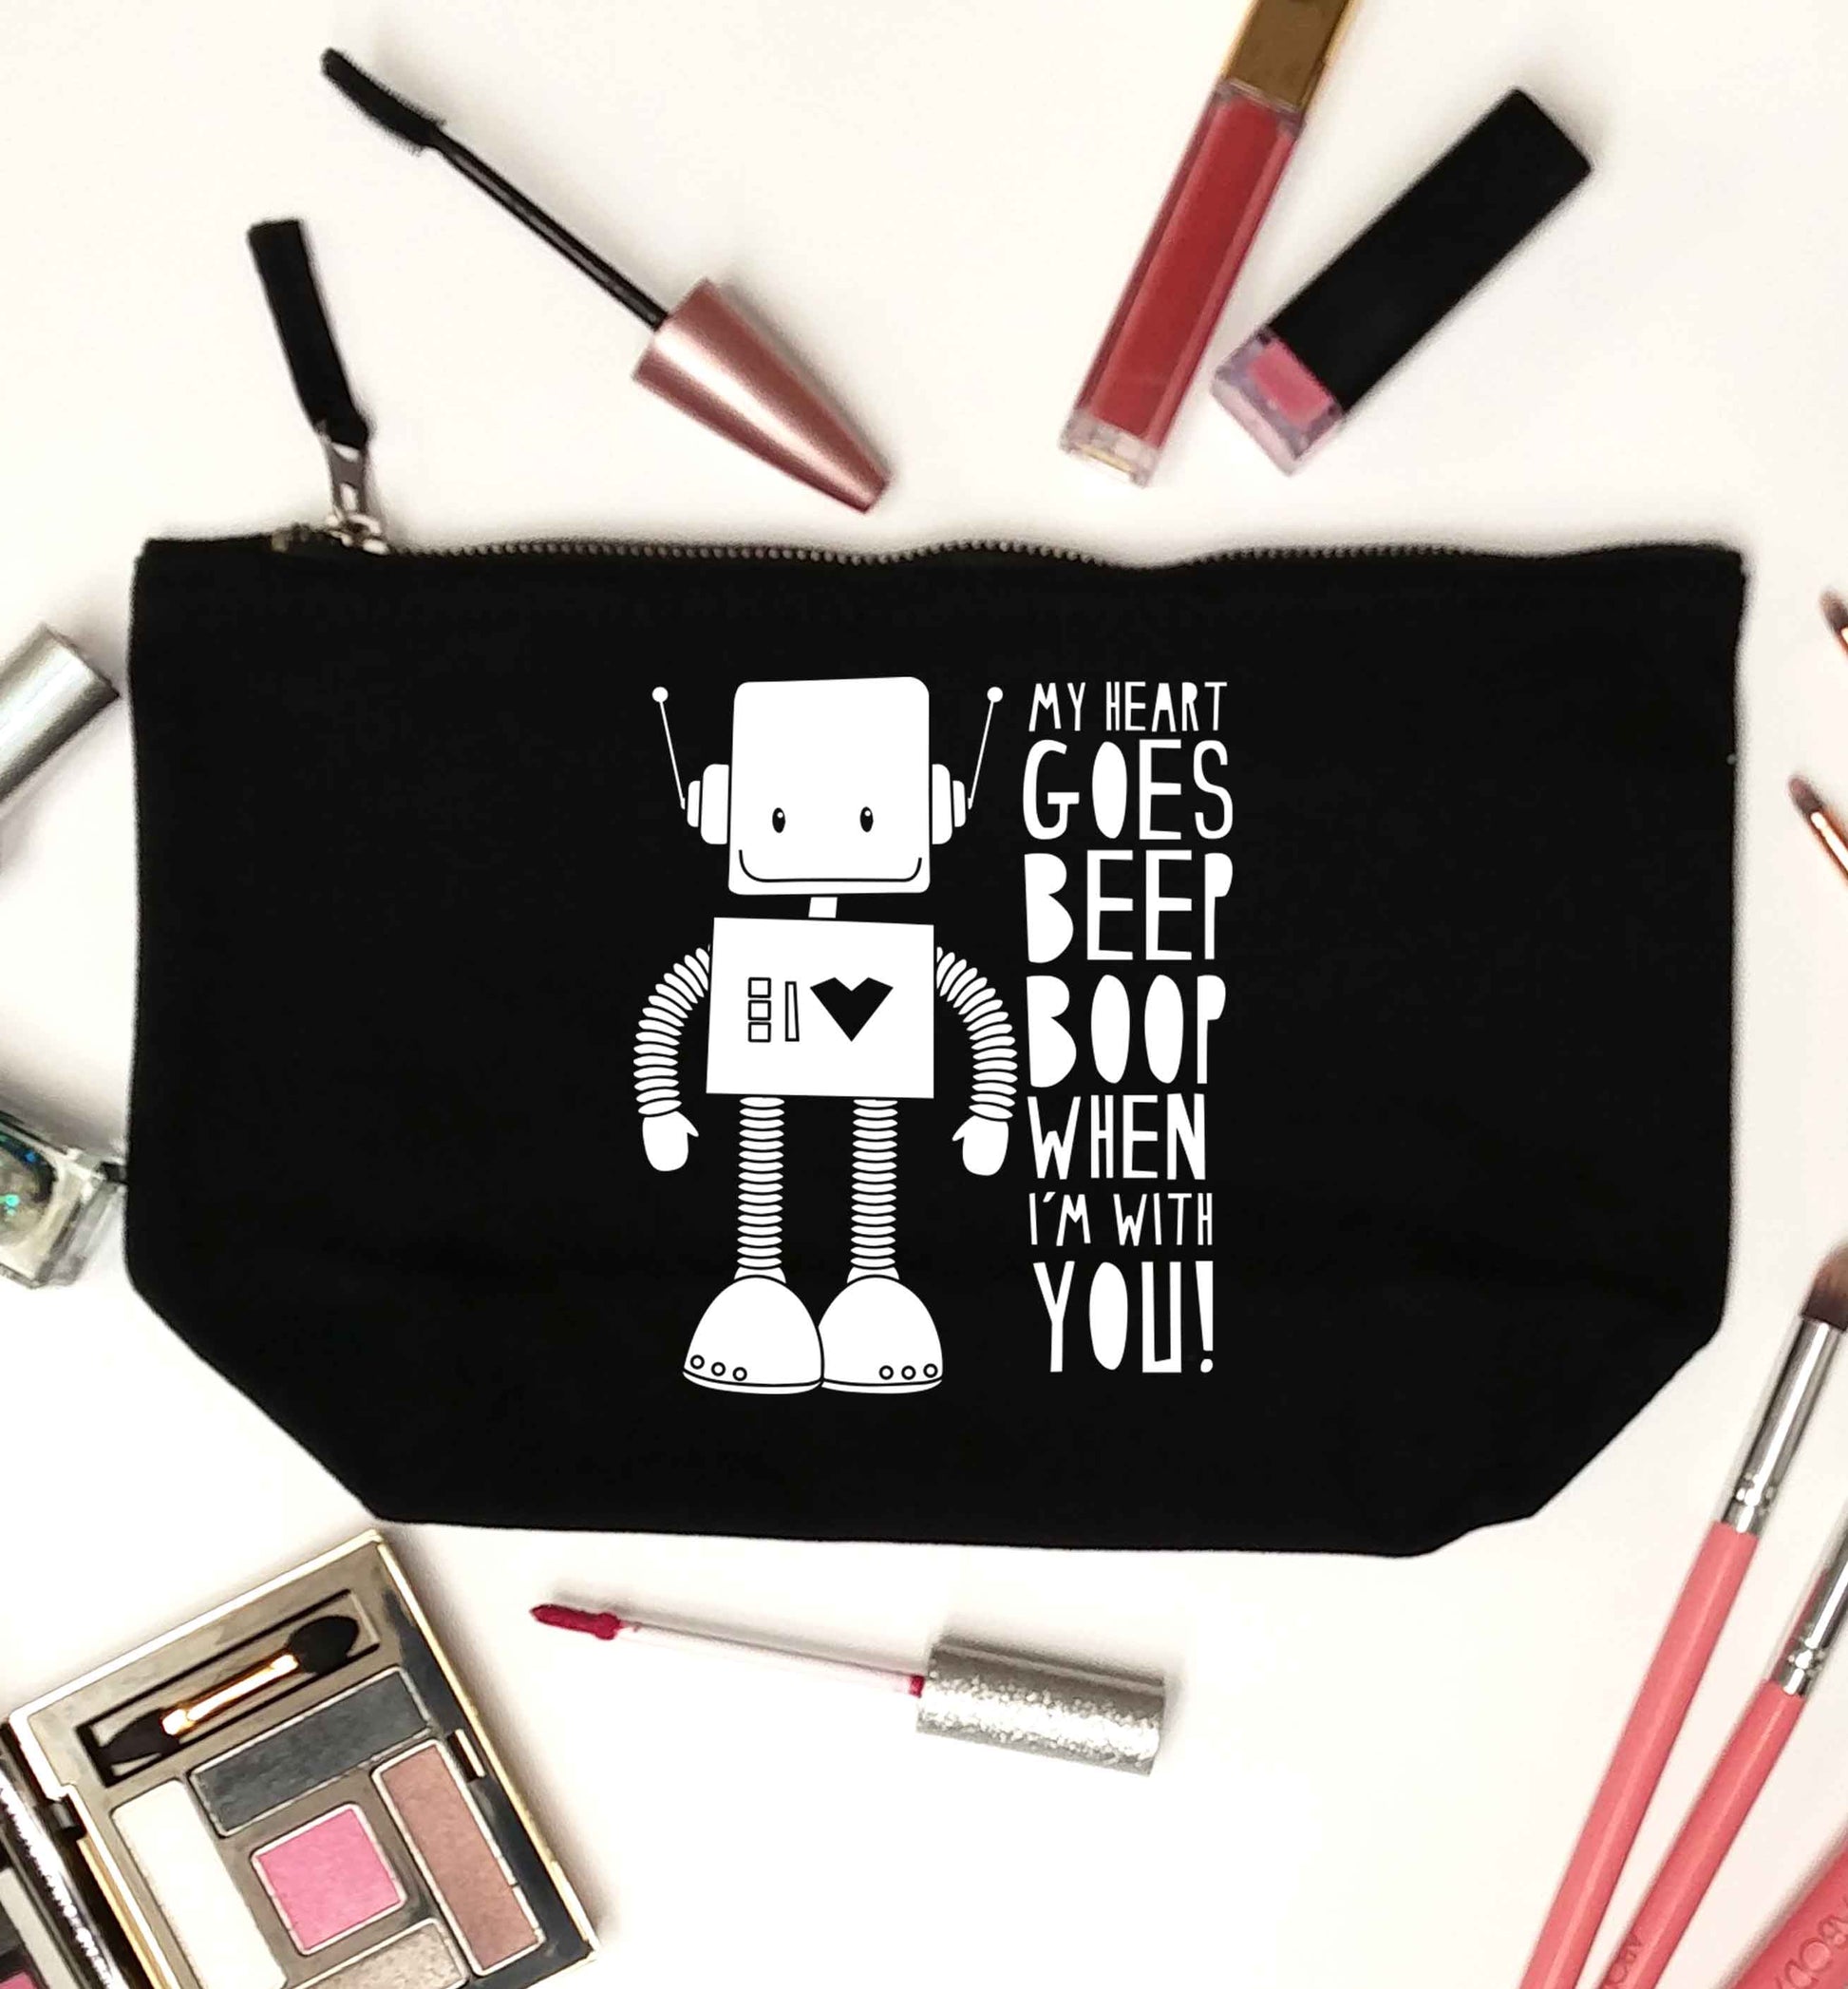 My heart goes beep boop when I'm with you black makeup bag